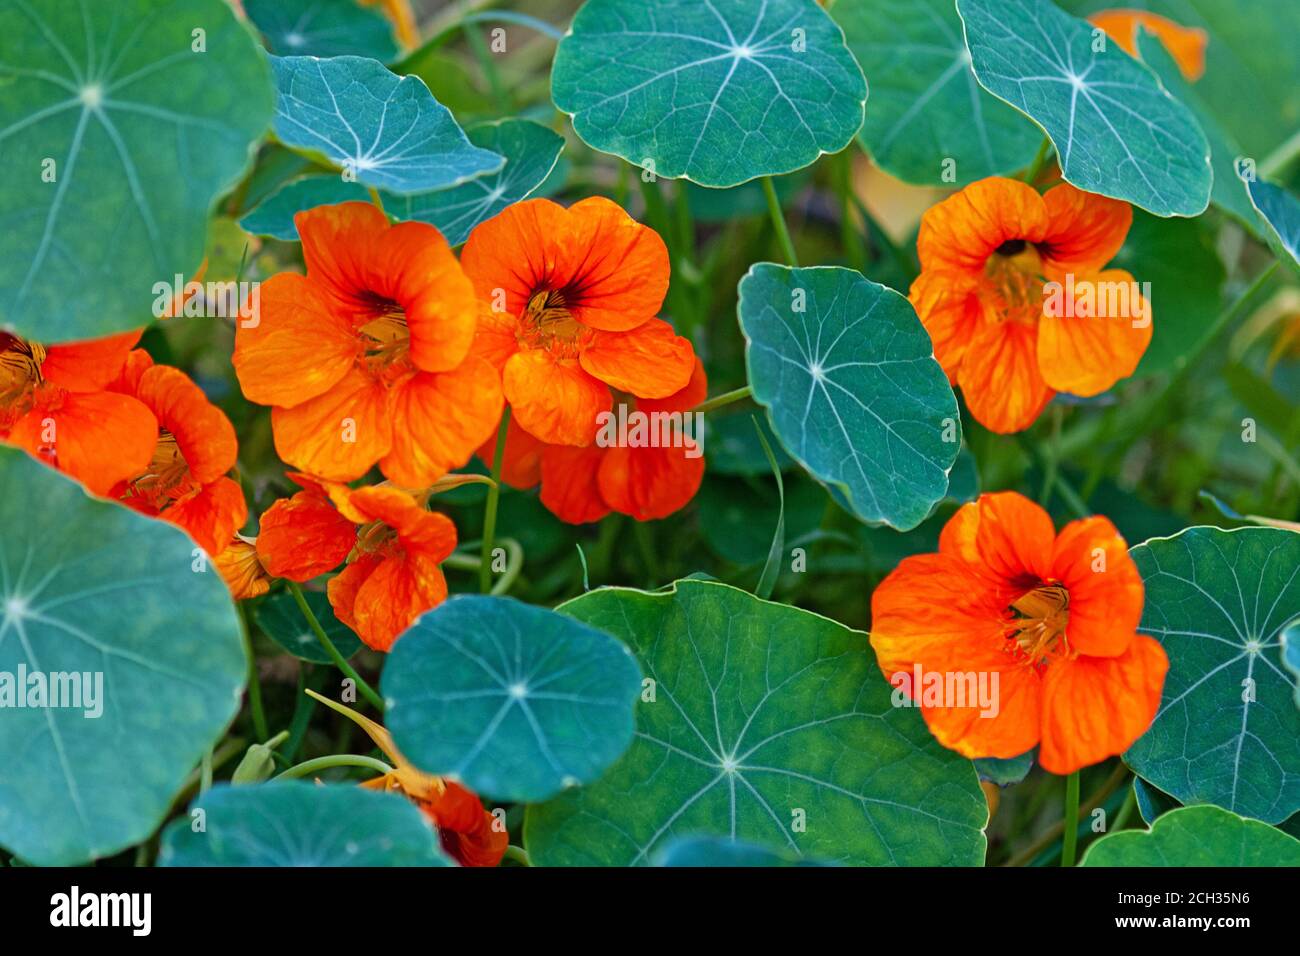 Nasturtium - South American trailing plant with round leaves and bright orange, yellow, or red ornamental edible flowers Stock Photo